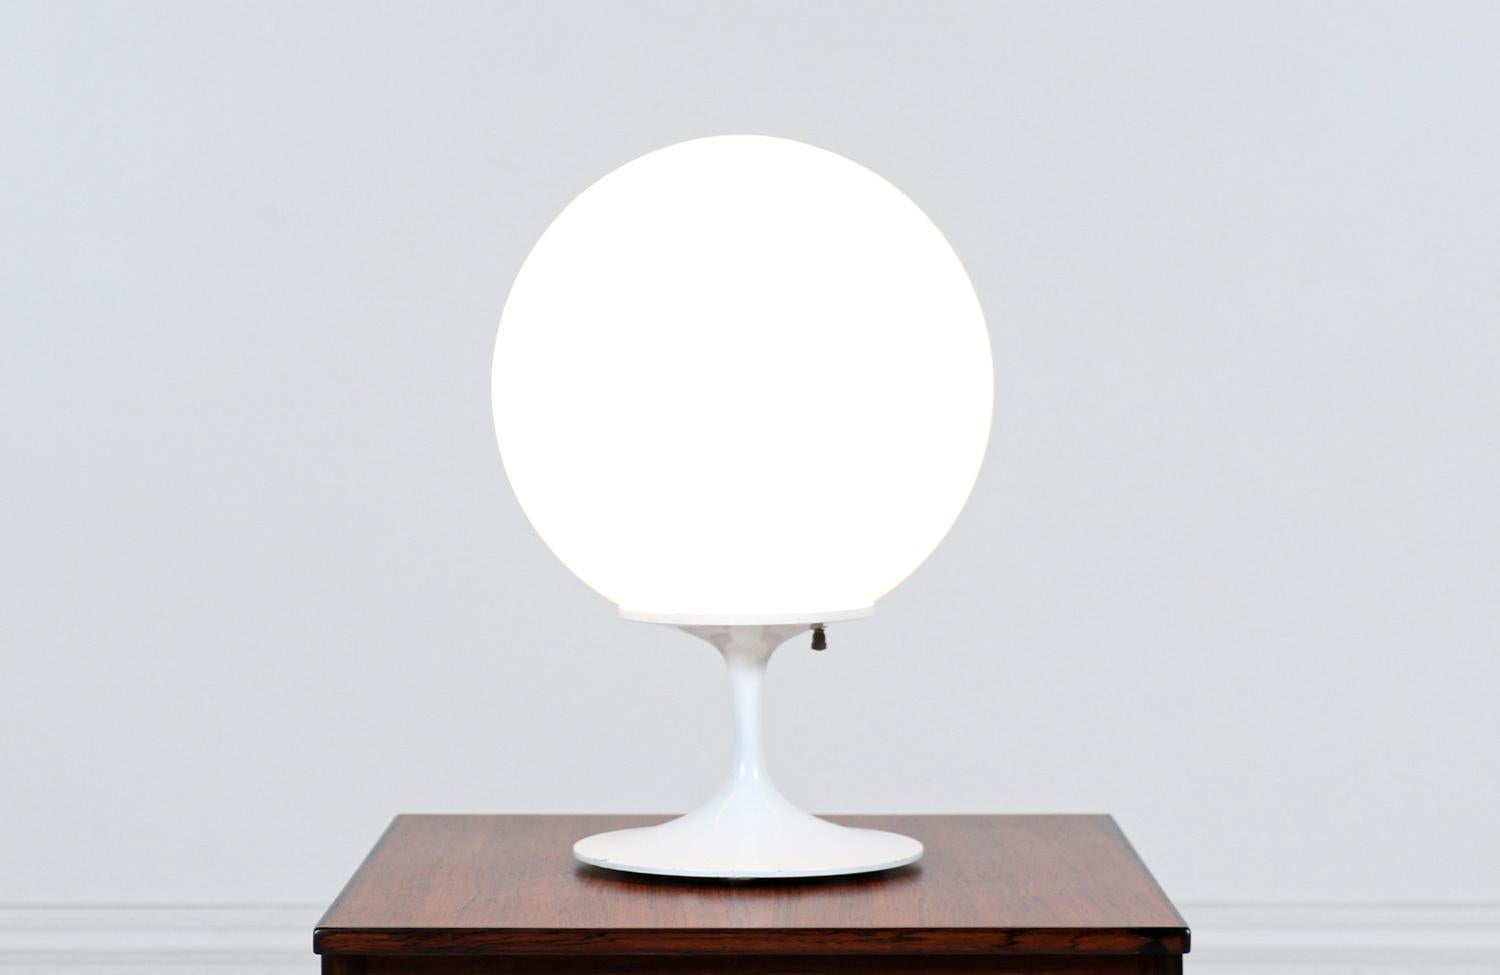 Classic modern table lamp designed by Los Angeles based designer Bill Curry for Design Line's 